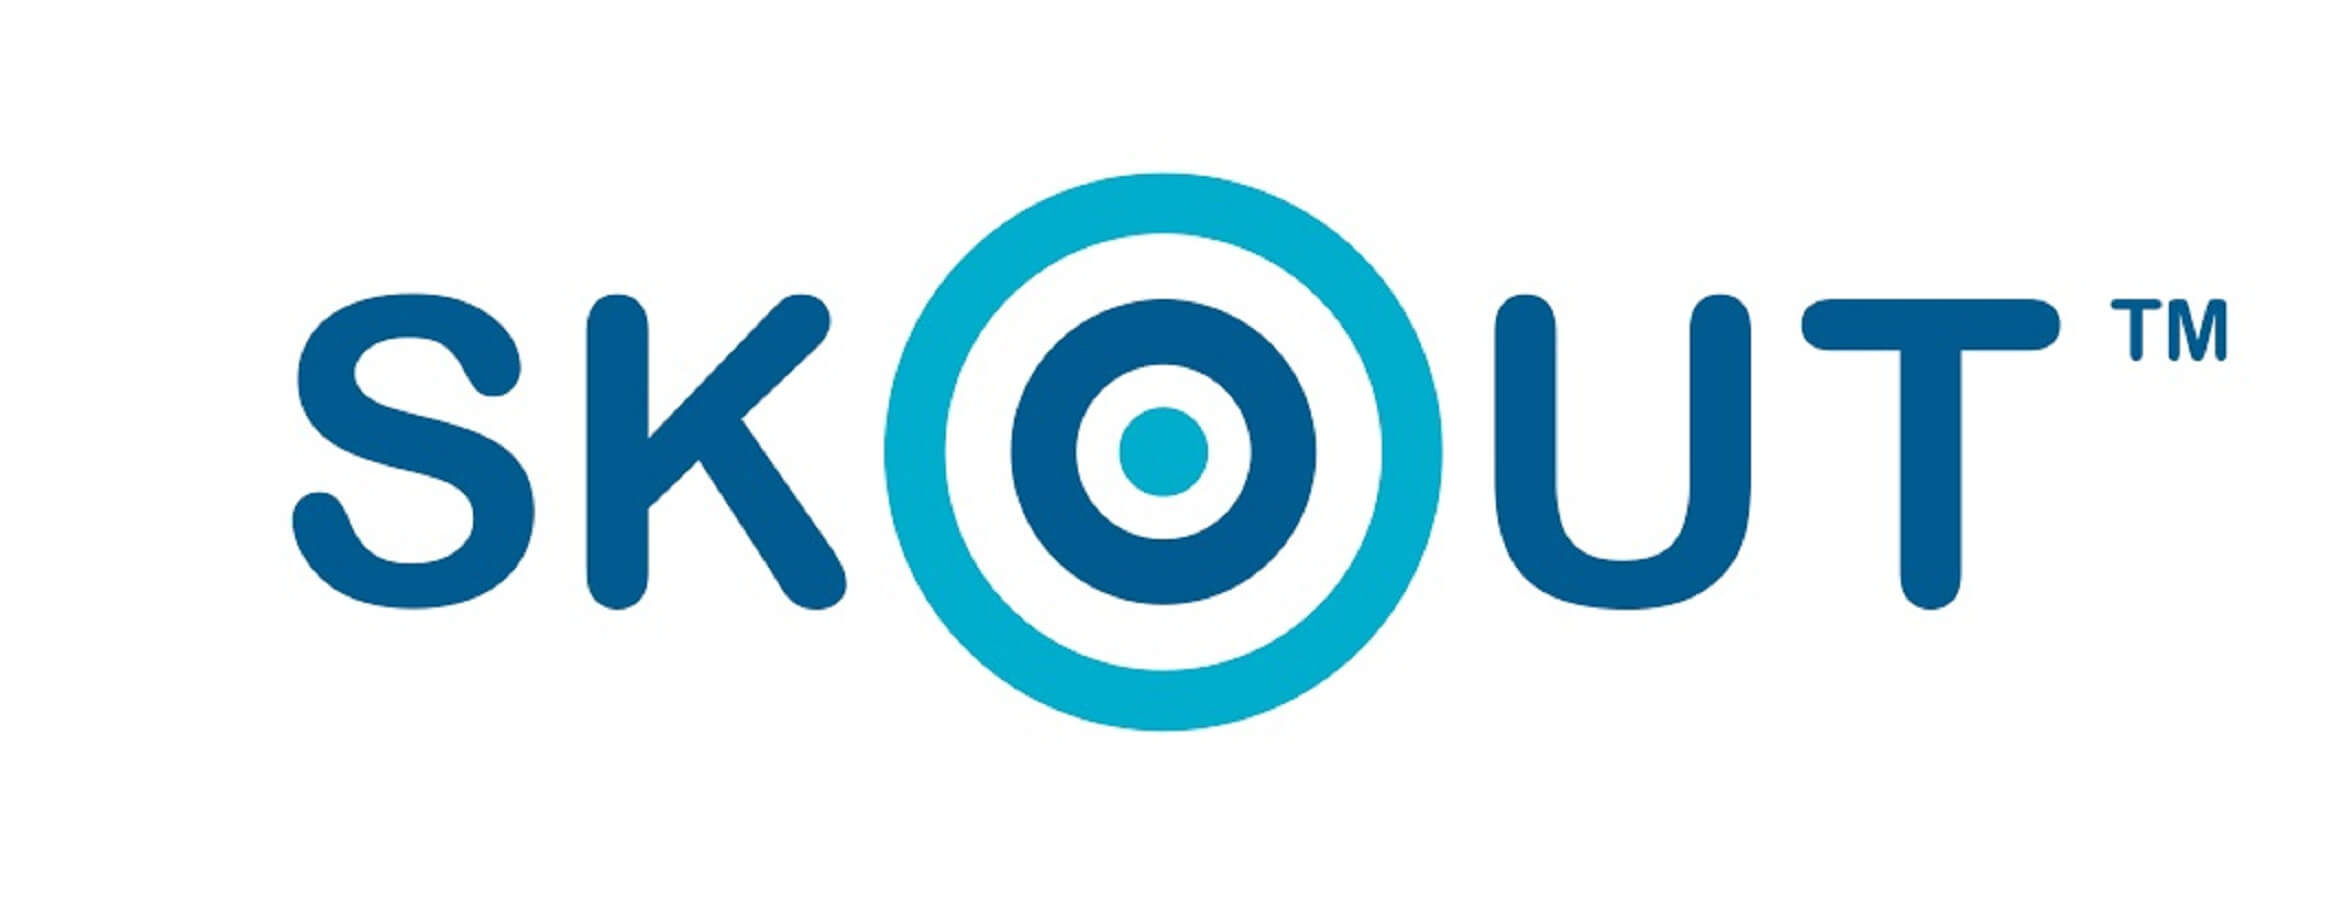 Is skout for 13 year olds?